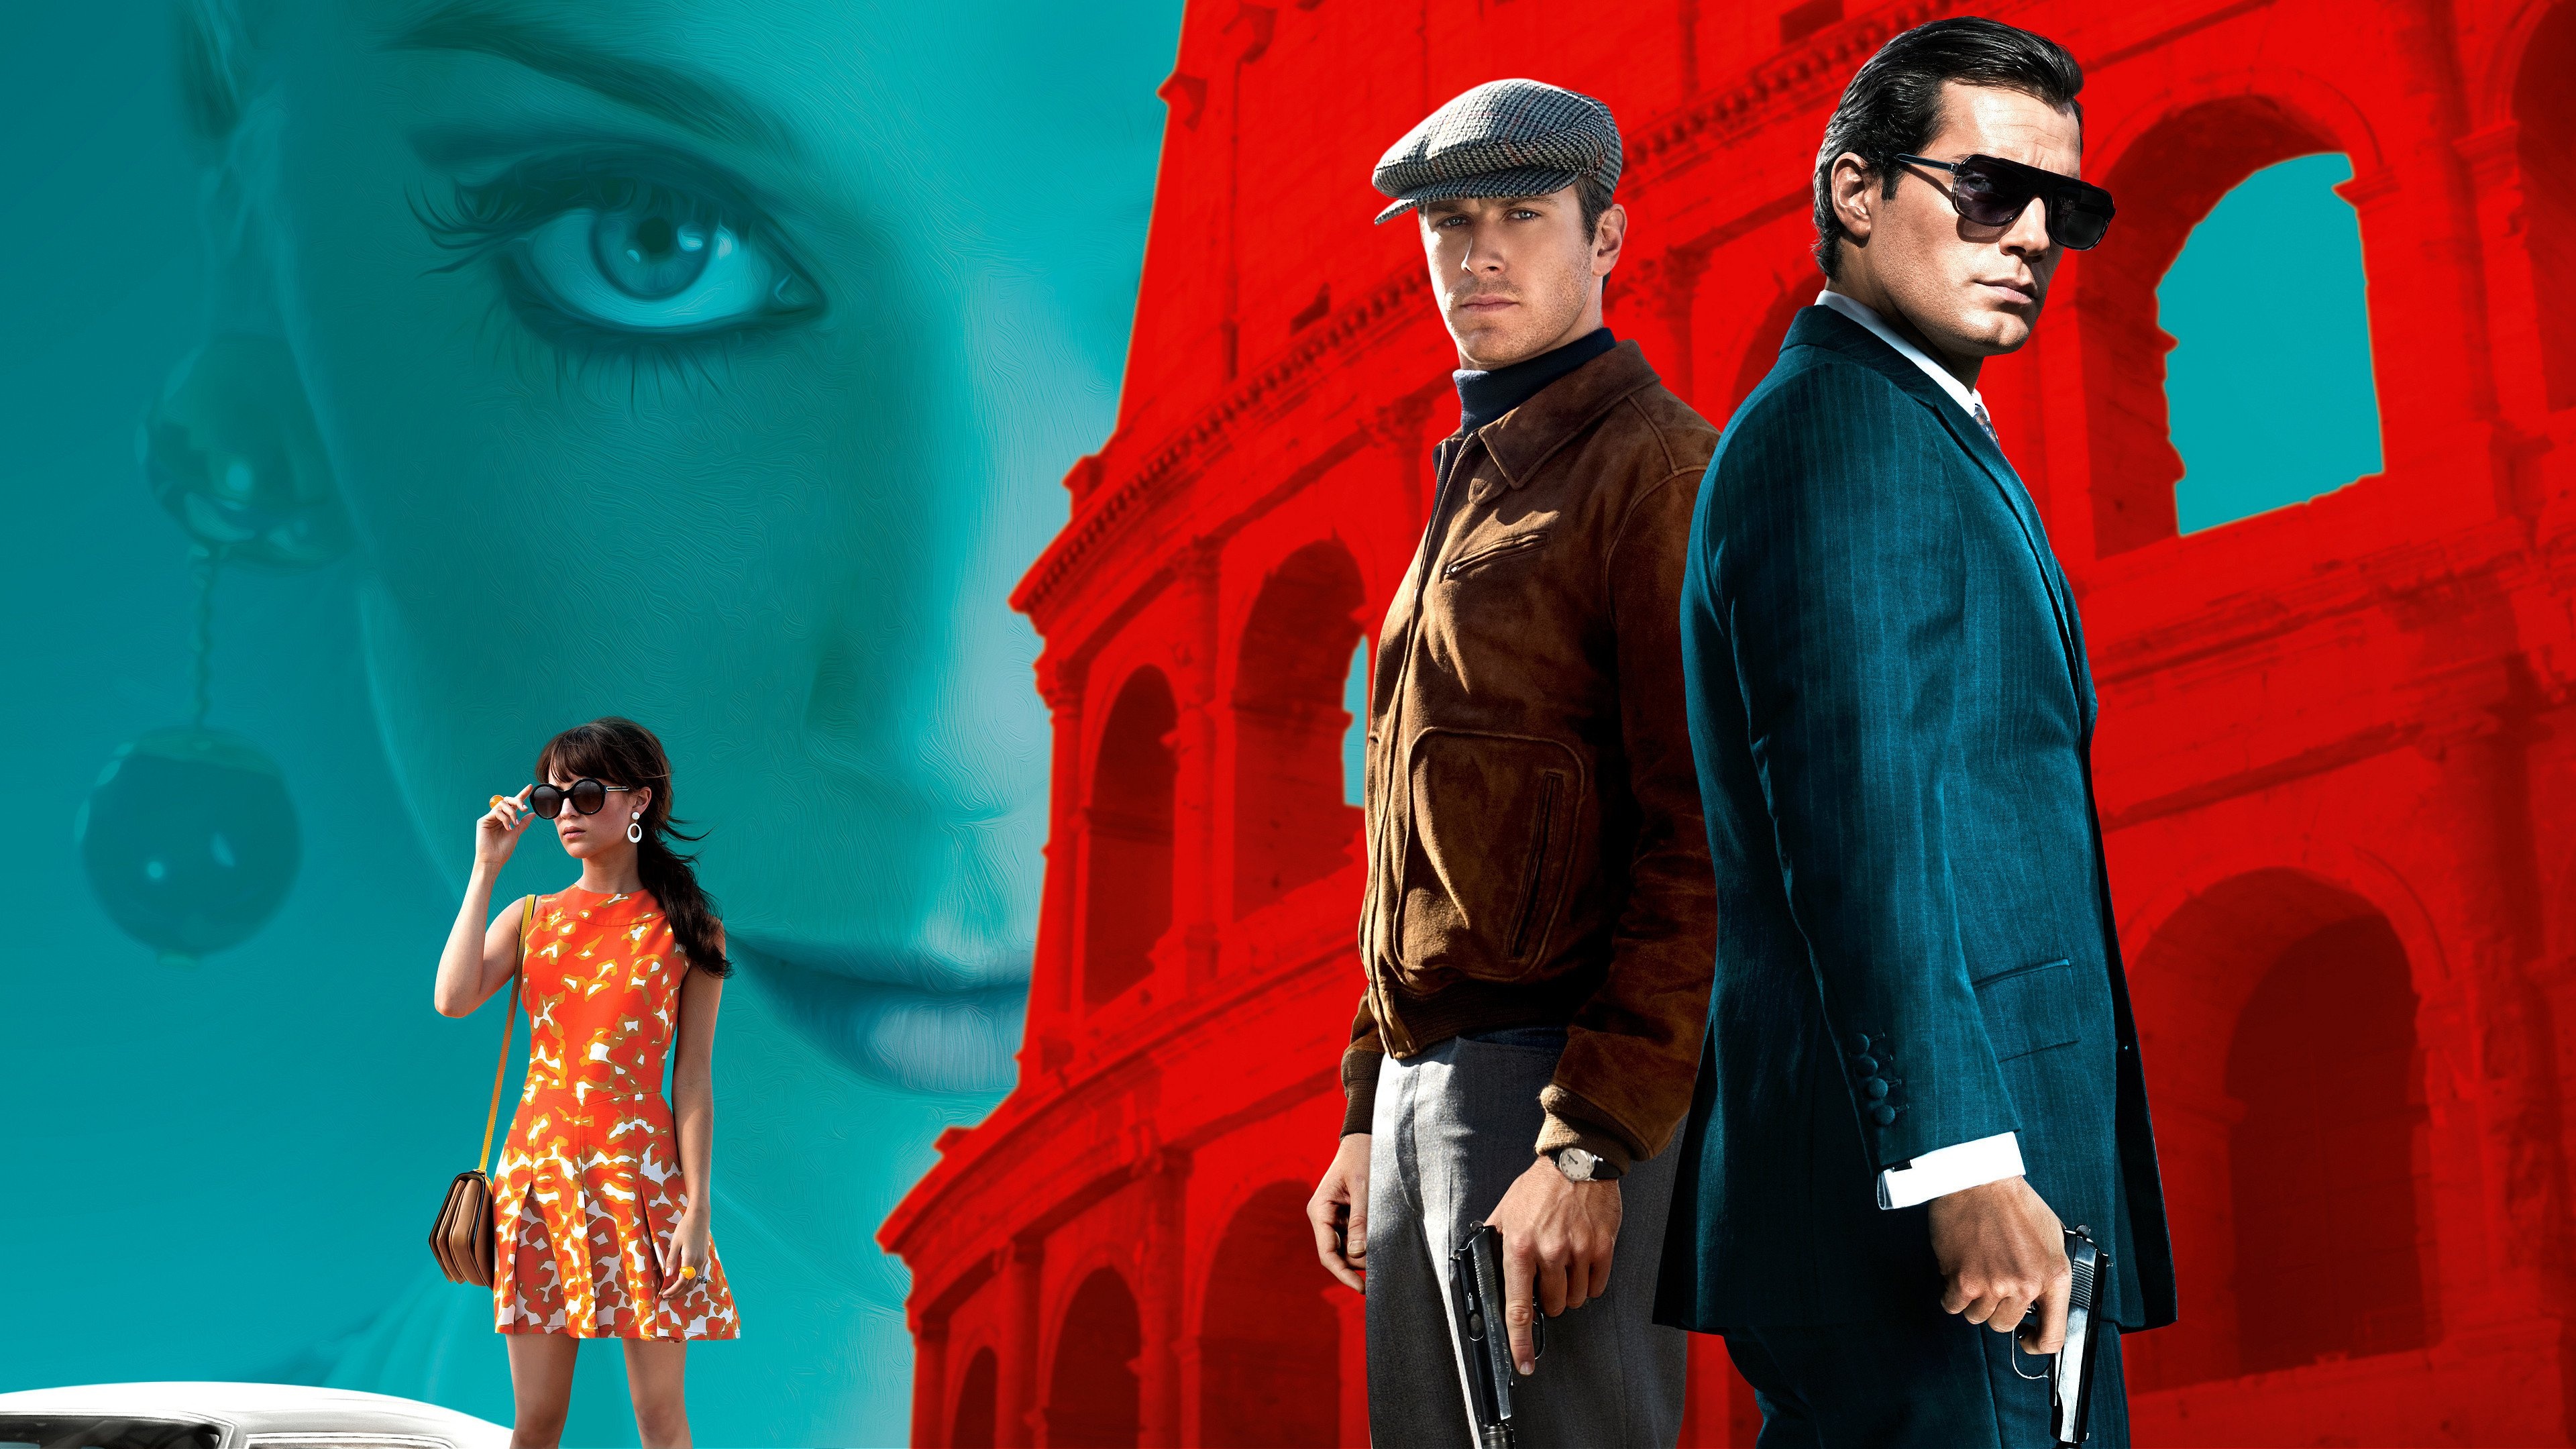 The Man from U.N.C.L.E., HD wallpapers, Background images, Stylish spies, 3840x2160 4K Desktop